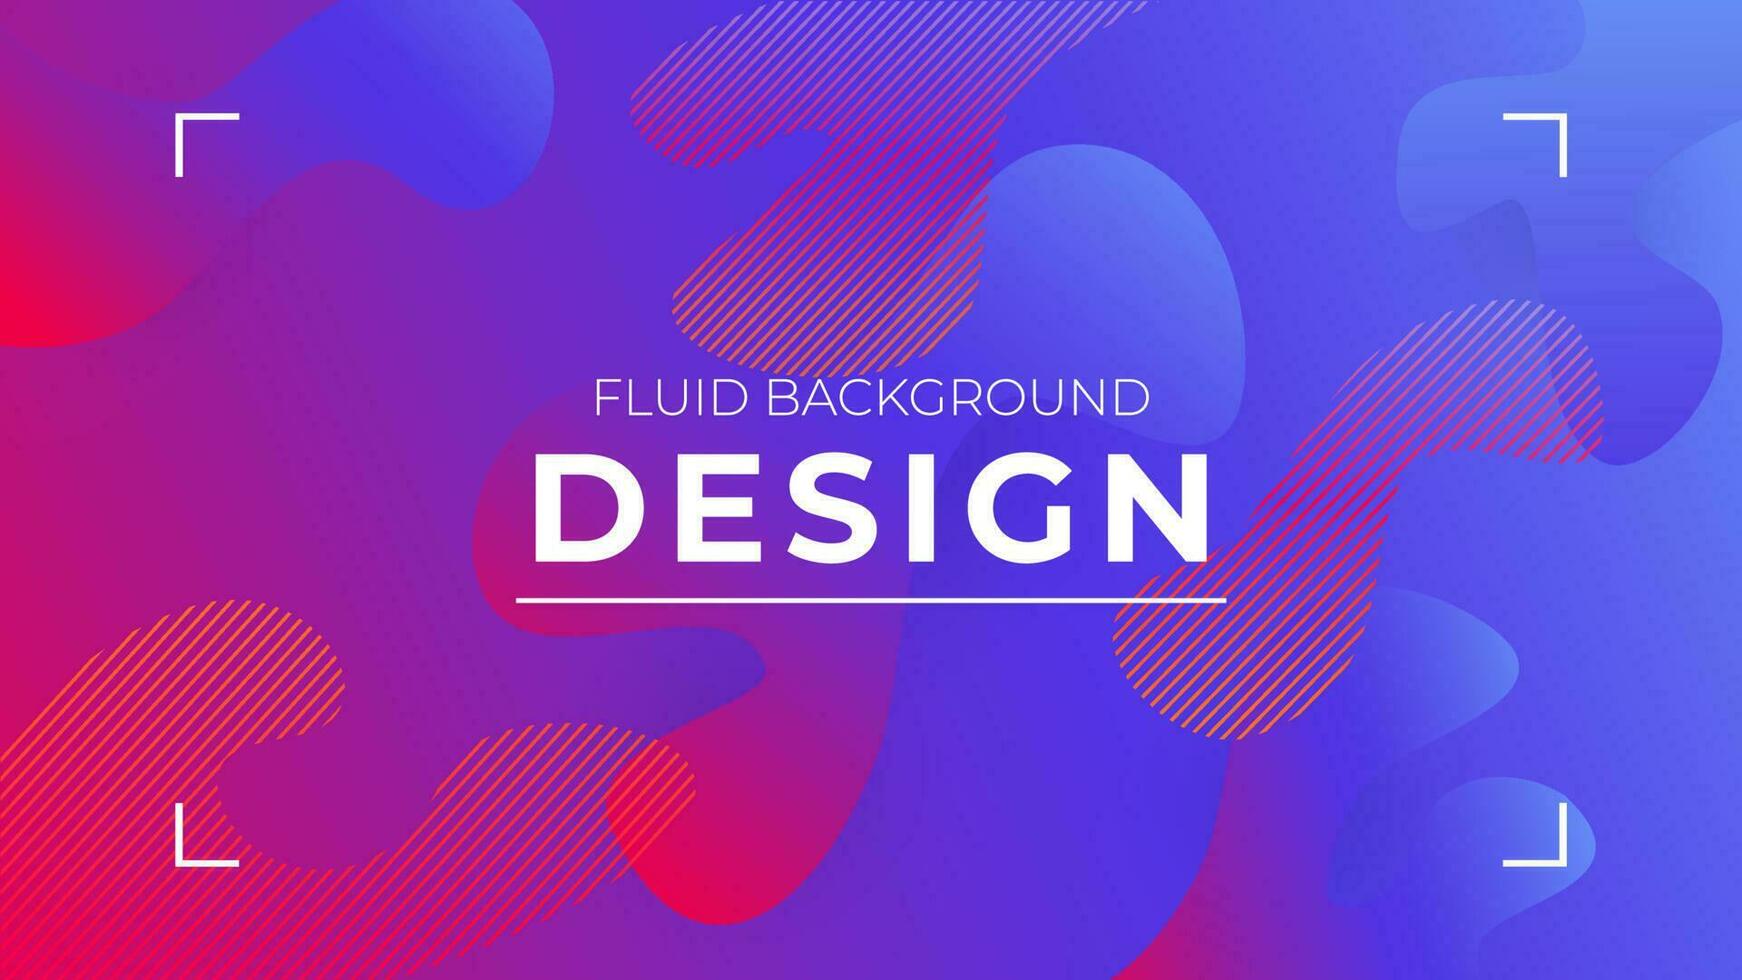 Fluid colorful background design. Liquid gradient shapes composition. Vector layout for websites, banners, presentations, posters and invitations.